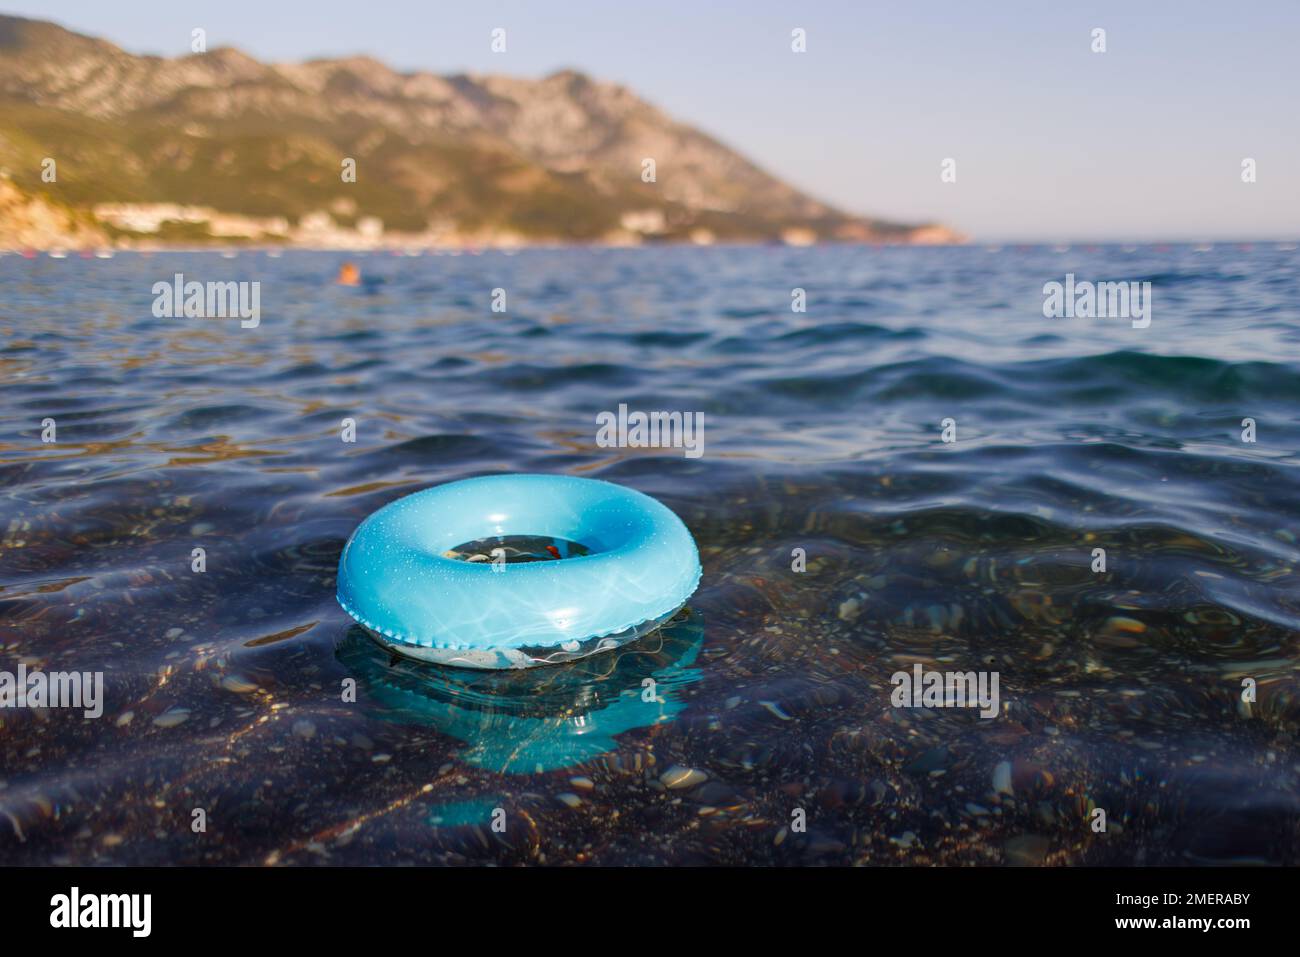 A small bright lost inflatable ring of blue color floats alone in the empty transparent blue Adriatic Sea in the evening Stock Photo